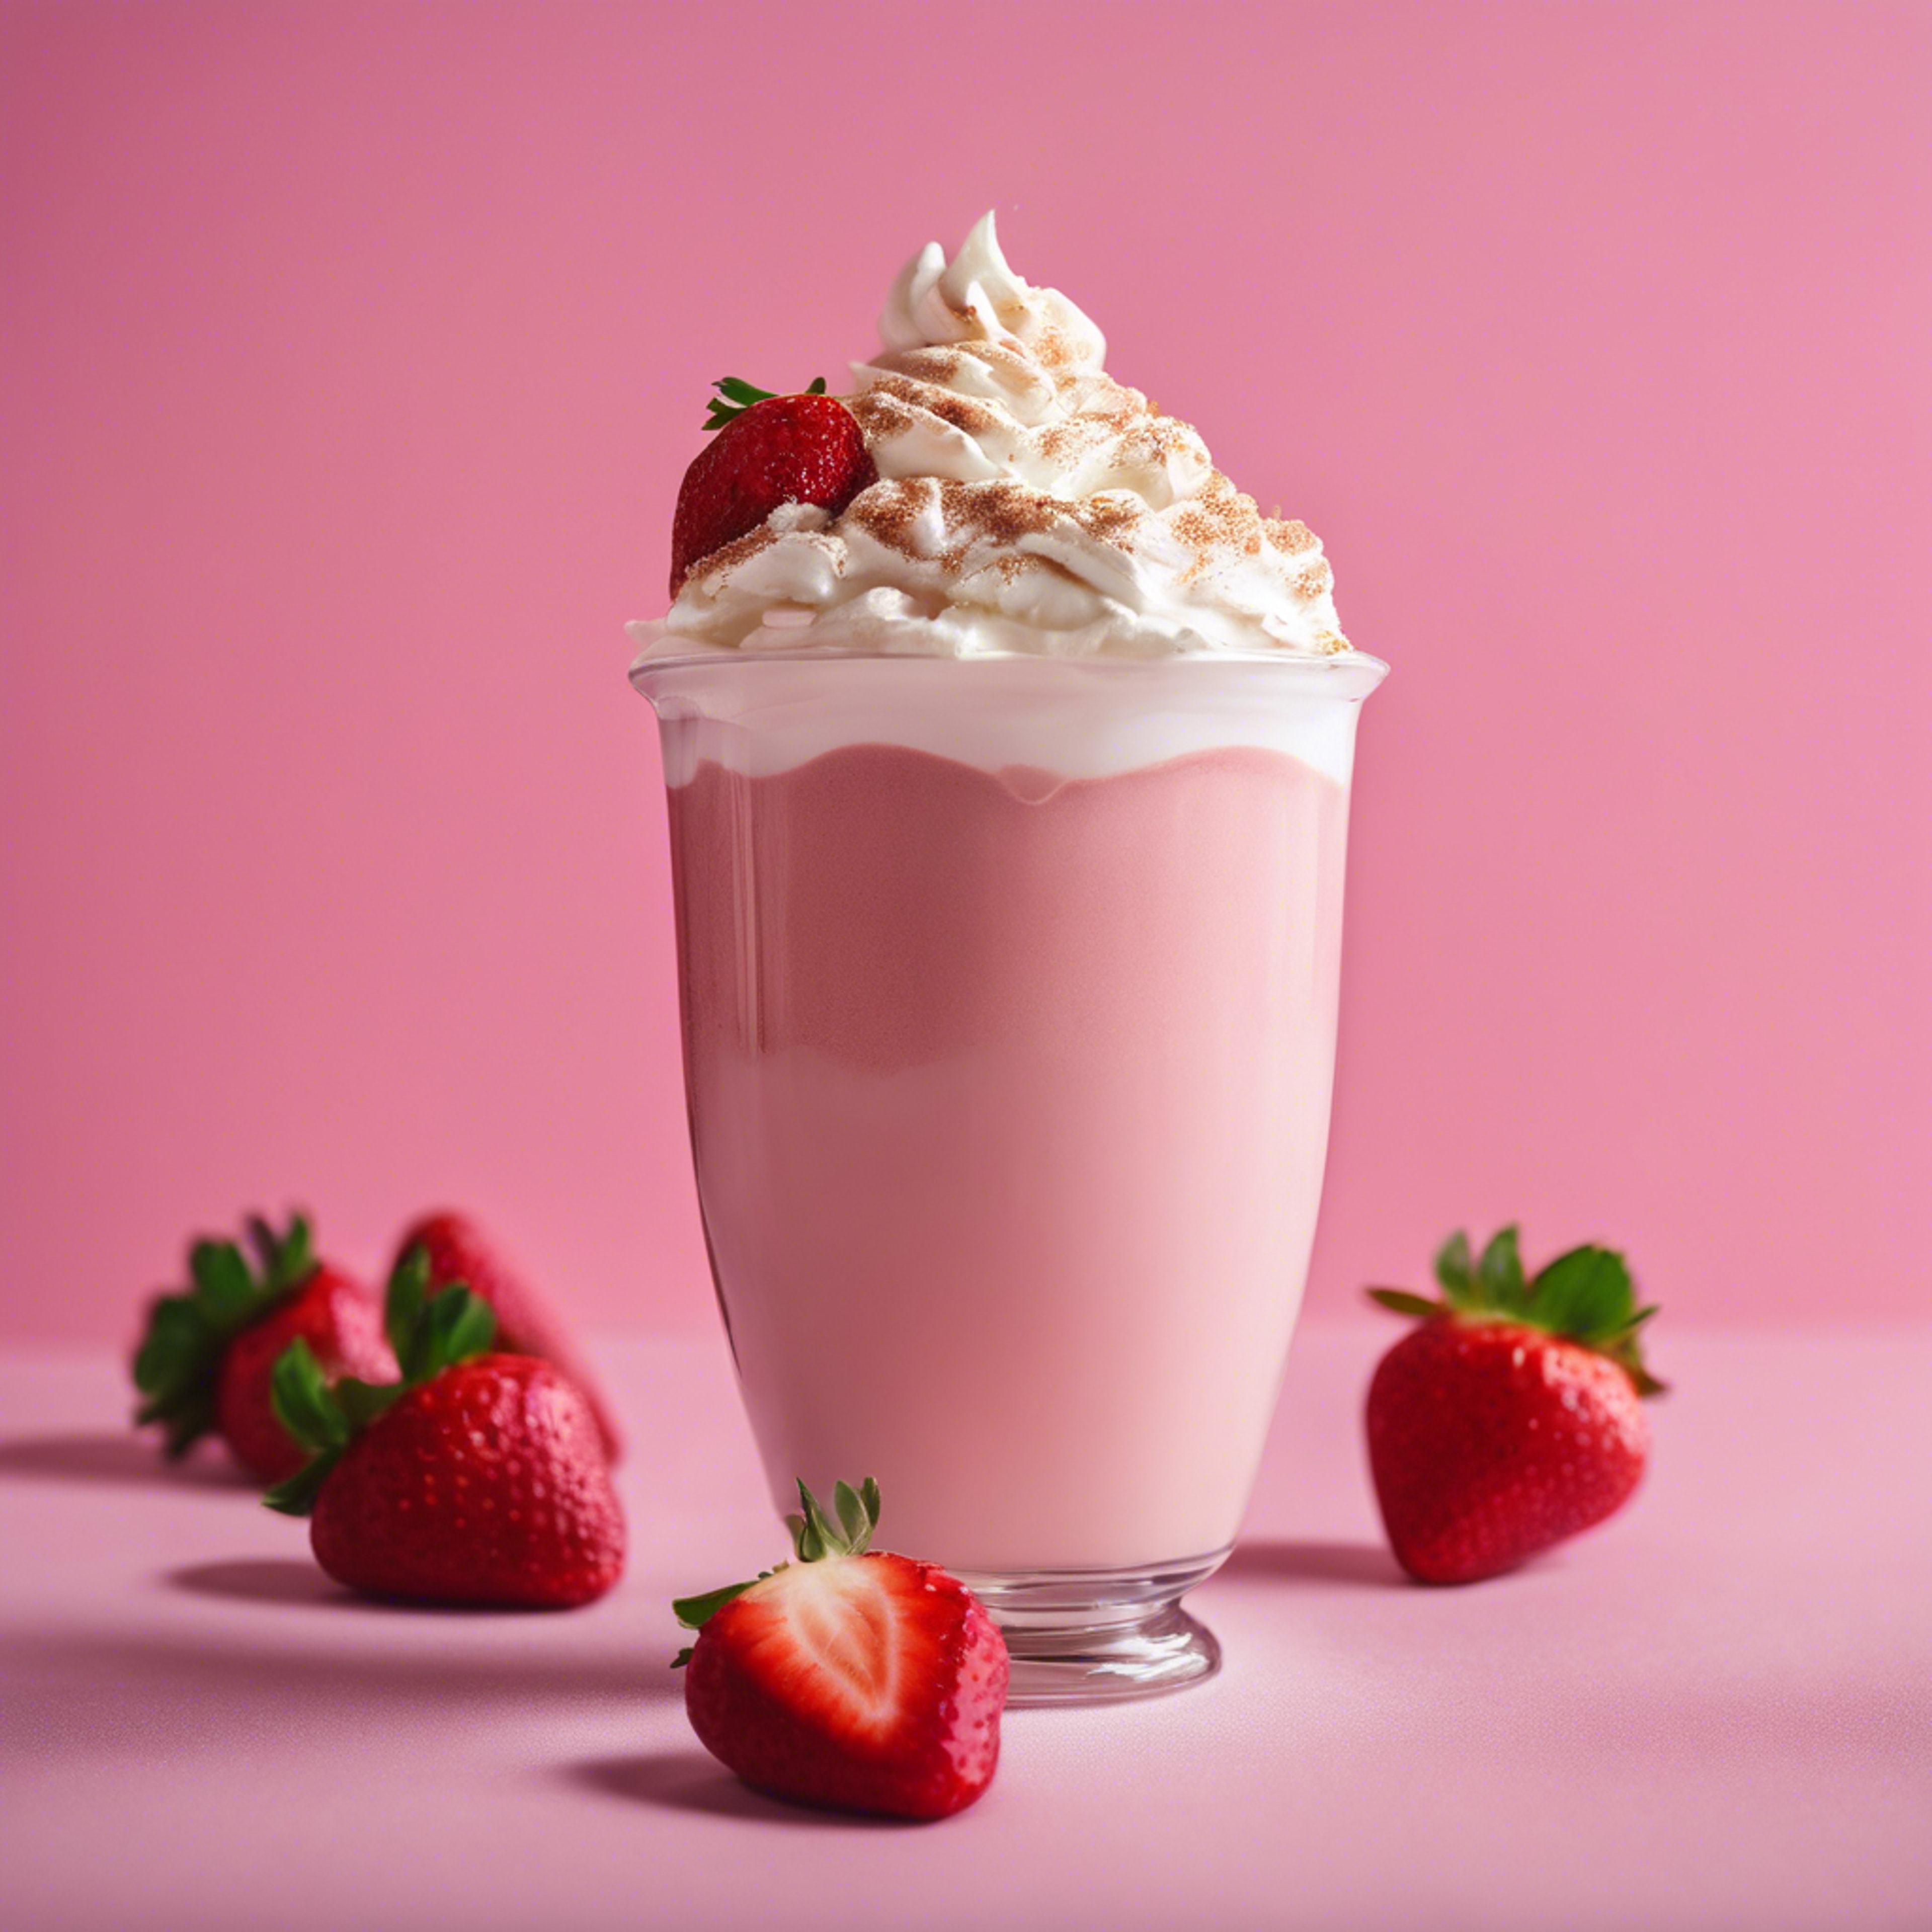 A freshly brewed strawberry latte with whipped cream against a pink backdrop. Wallpaper[f1420ed34c924526b0ea]